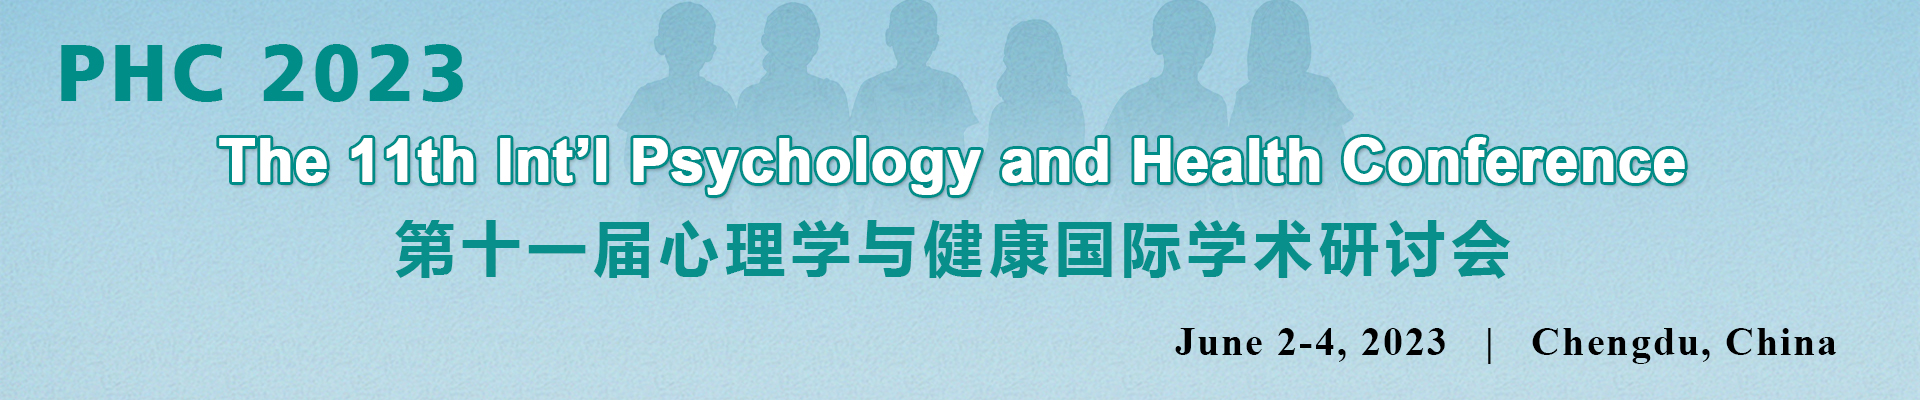 The 11th Int’l Psychology and Health Conference (PHC 2023) 